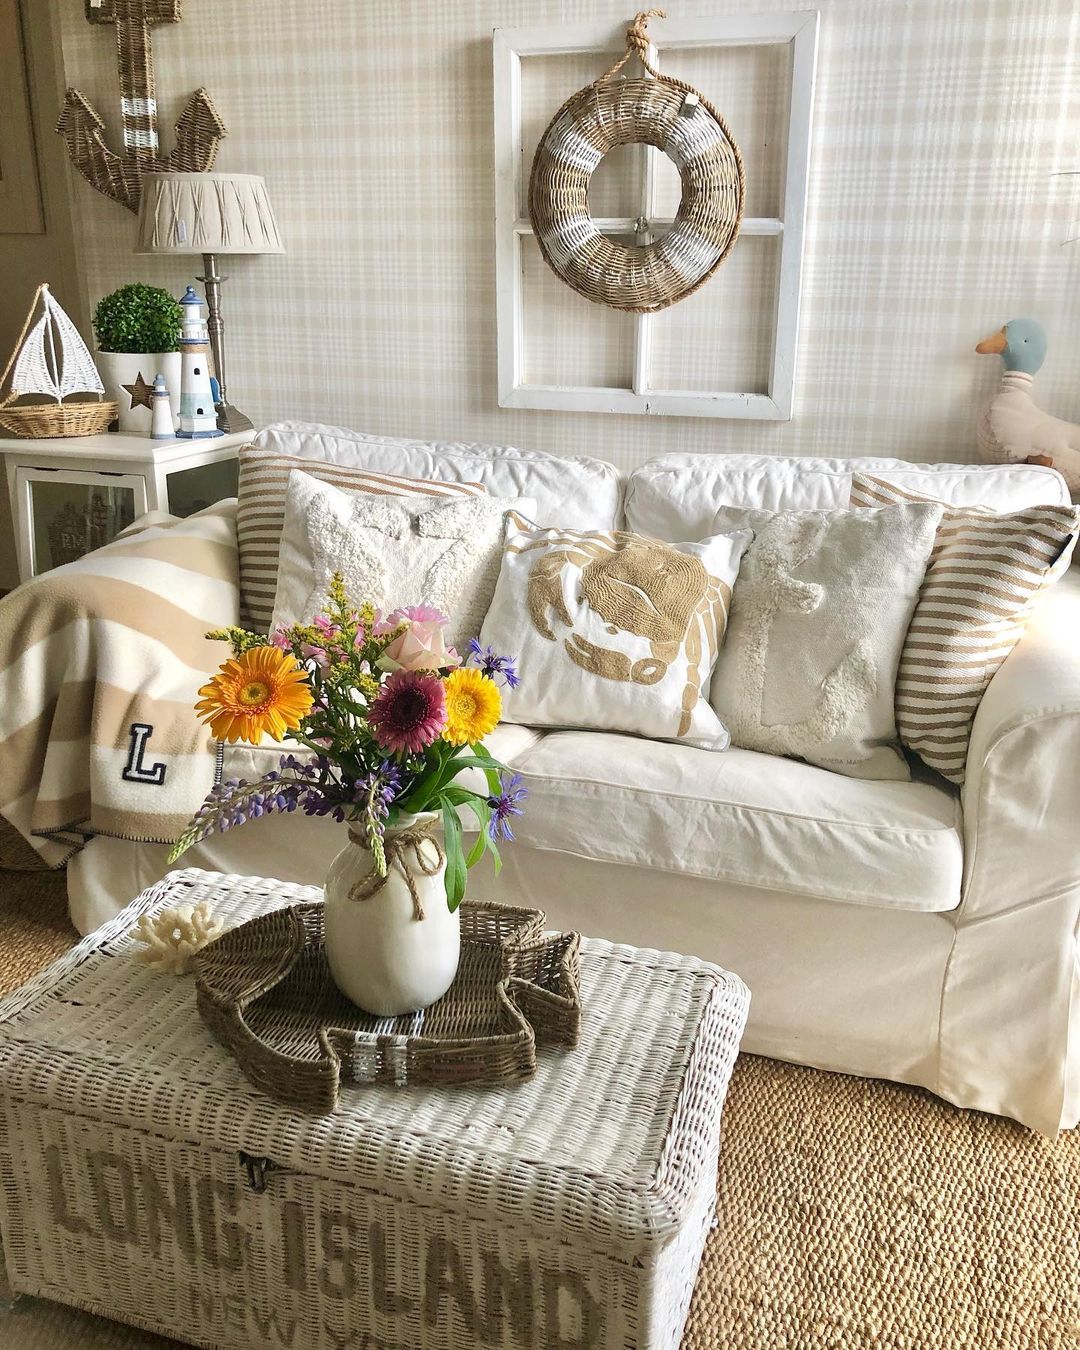 a farmhouse-coastal-style room with a couch with white slipcover, throw pillows, and a wicker storage box used as a coffee table styled with florals in a vase